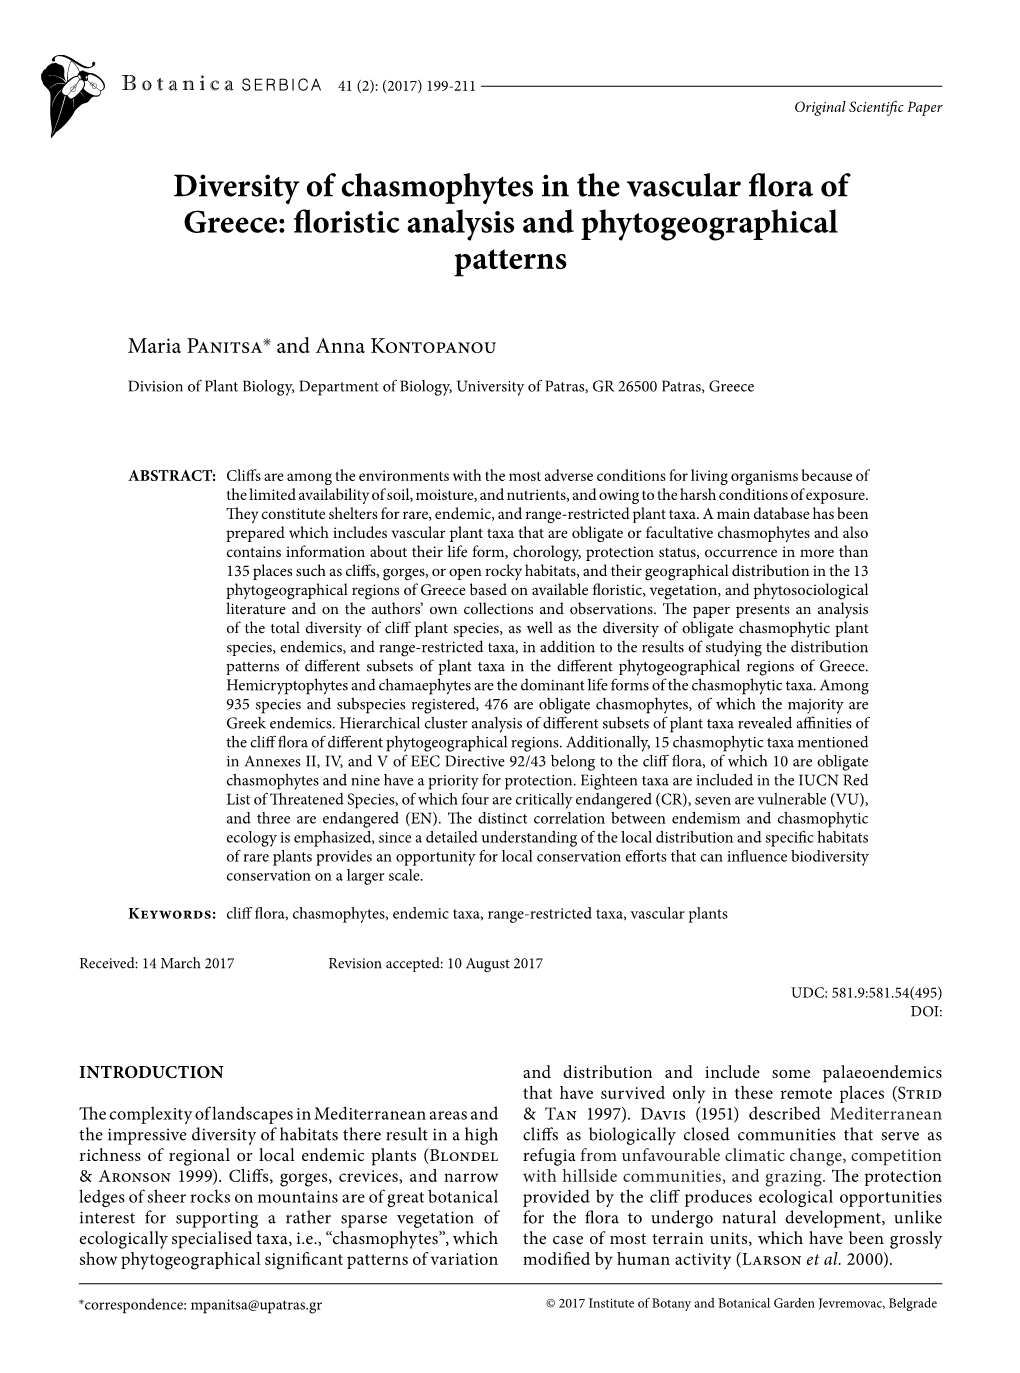 Diversity of Chasmophytes in the Vascular Flora of Greece: Floristic Analysis and Phytogeographical Patterns